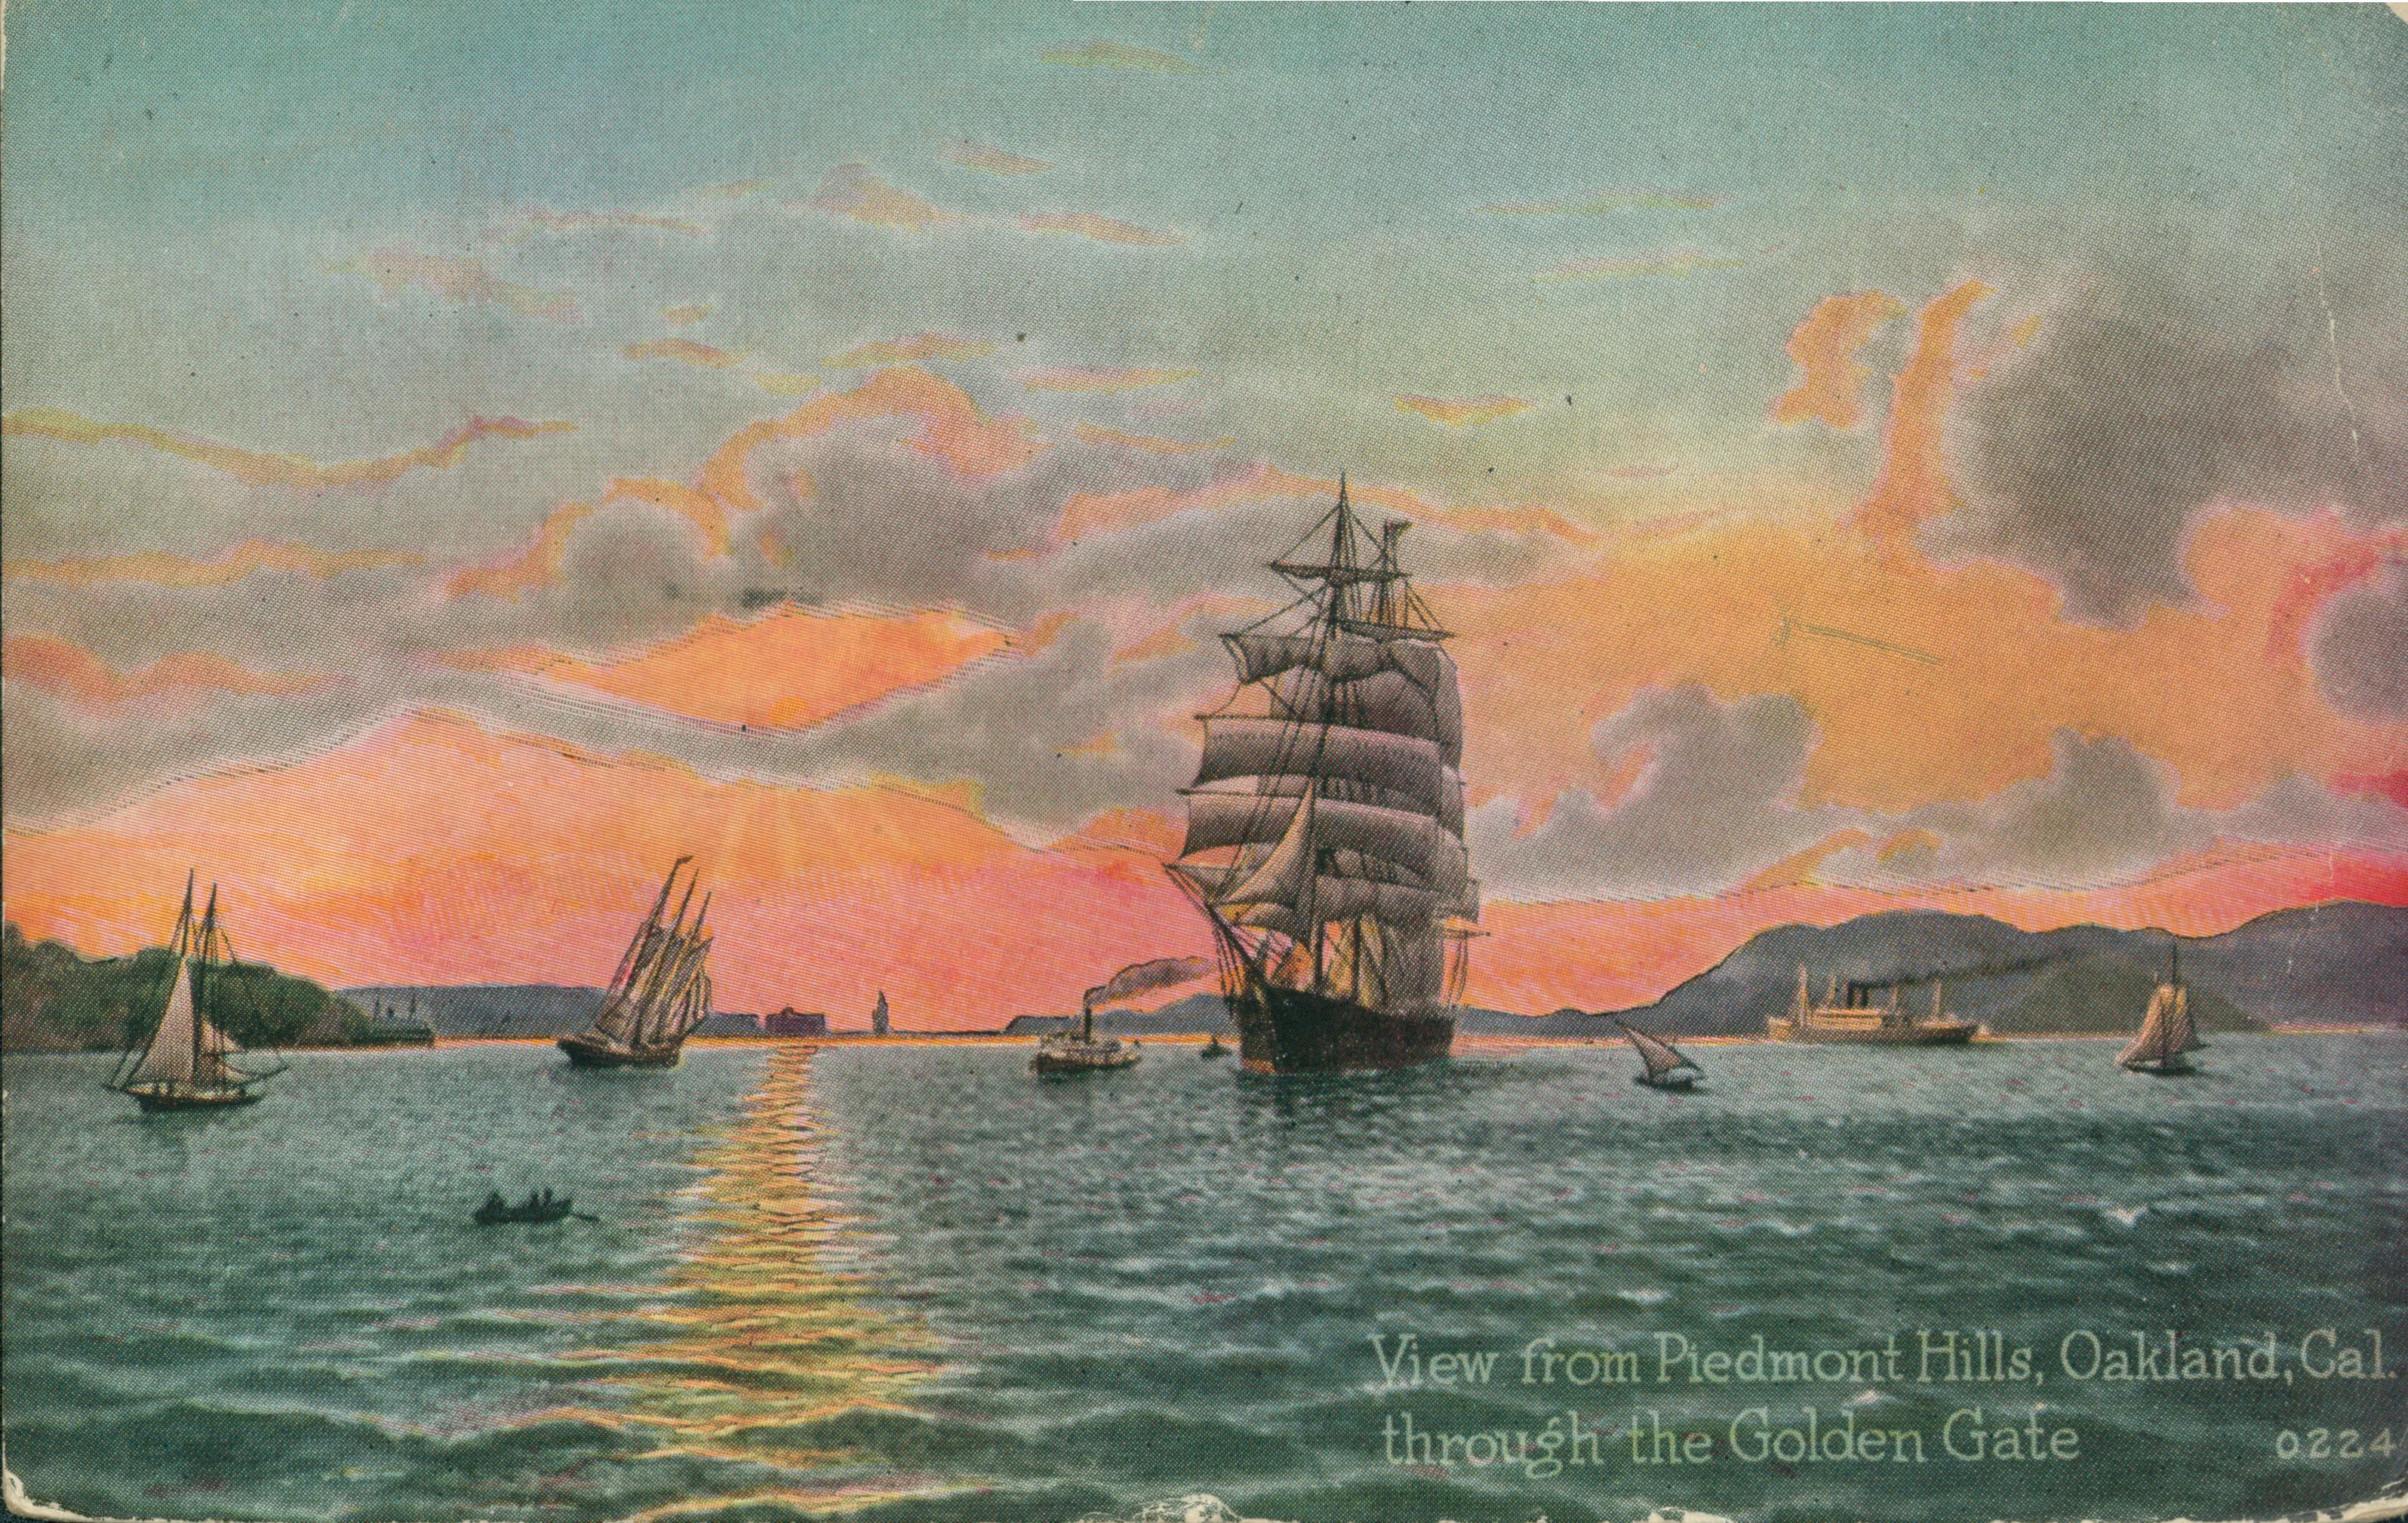 Shows several sailing ships in the bay with the Golden Gate at sunset in the distance